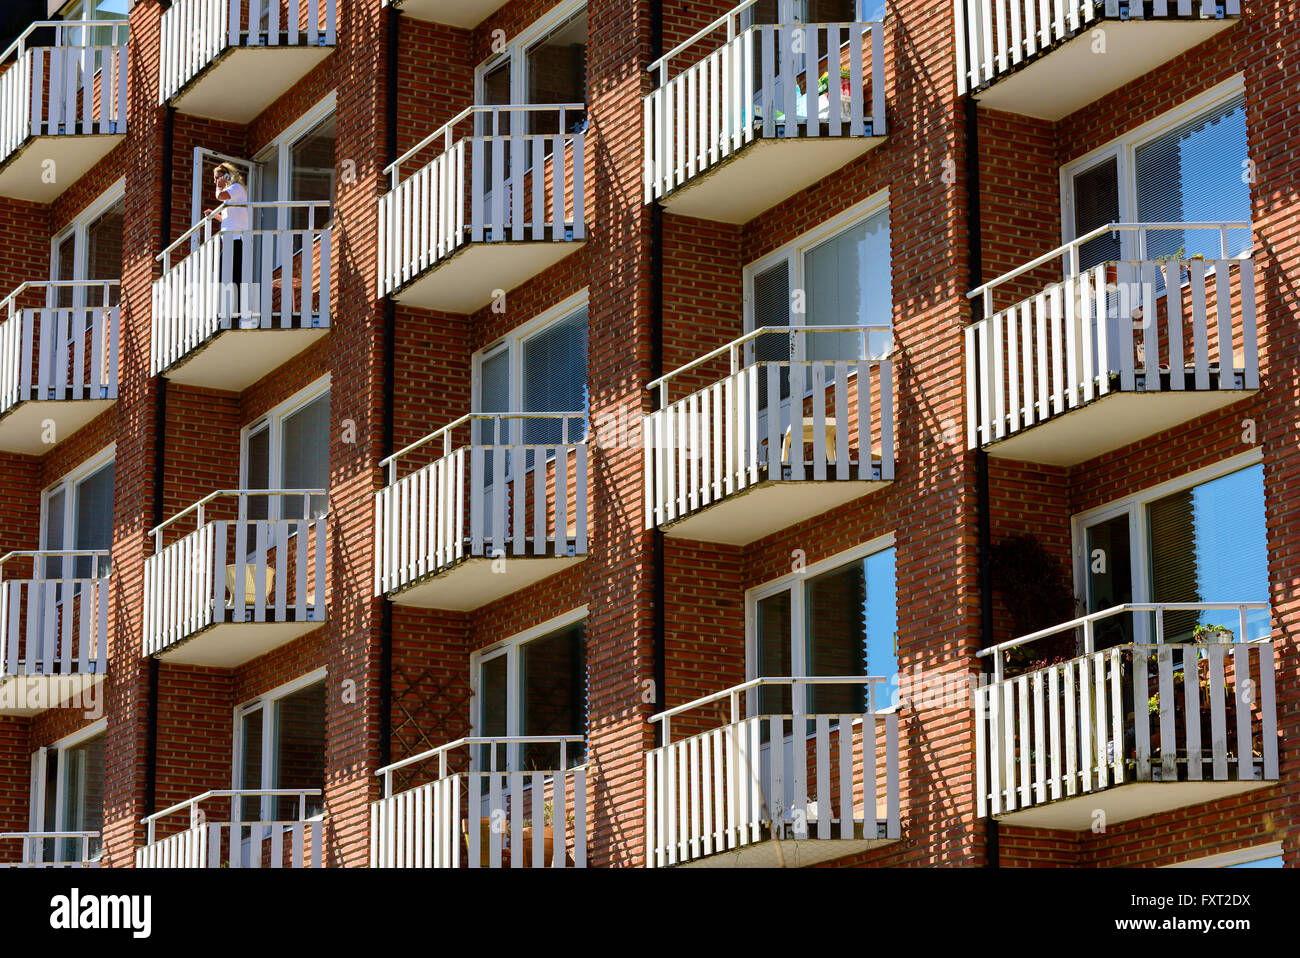 Lund, Sweden - April 11, 2016: White balconies on a red brick building in town. Woman talking in phone on one balcony. Stock Photo